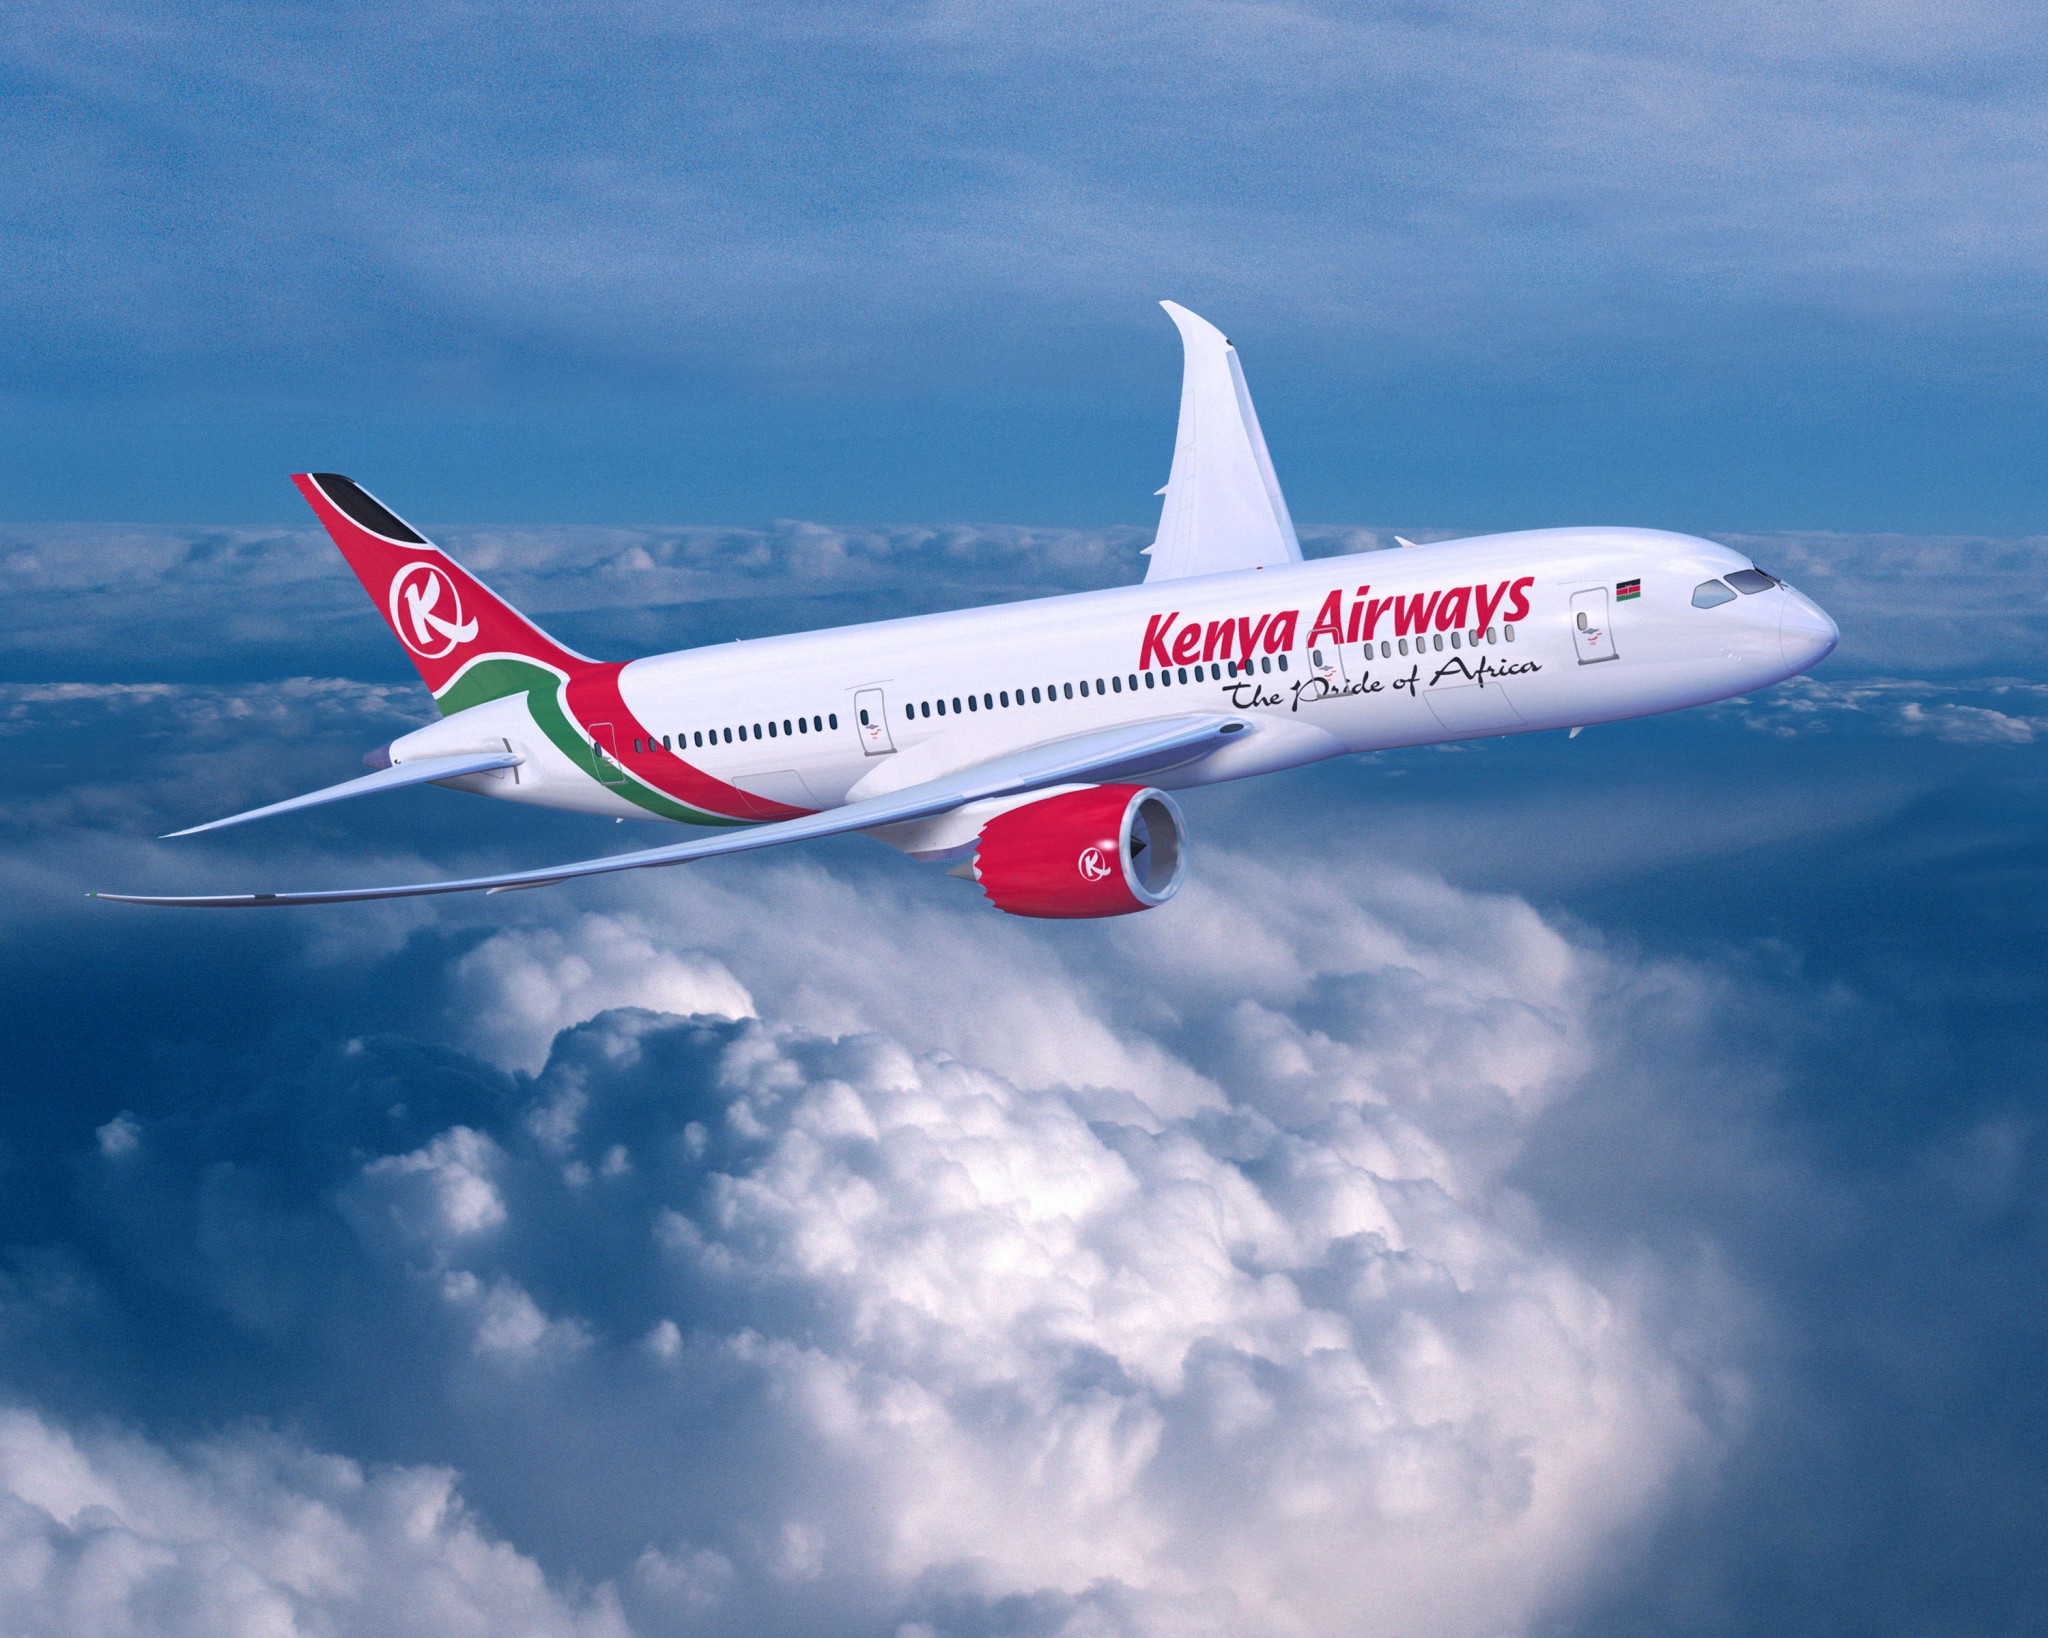 Kenya Airways to get bailout of $283.7 million for restructuring